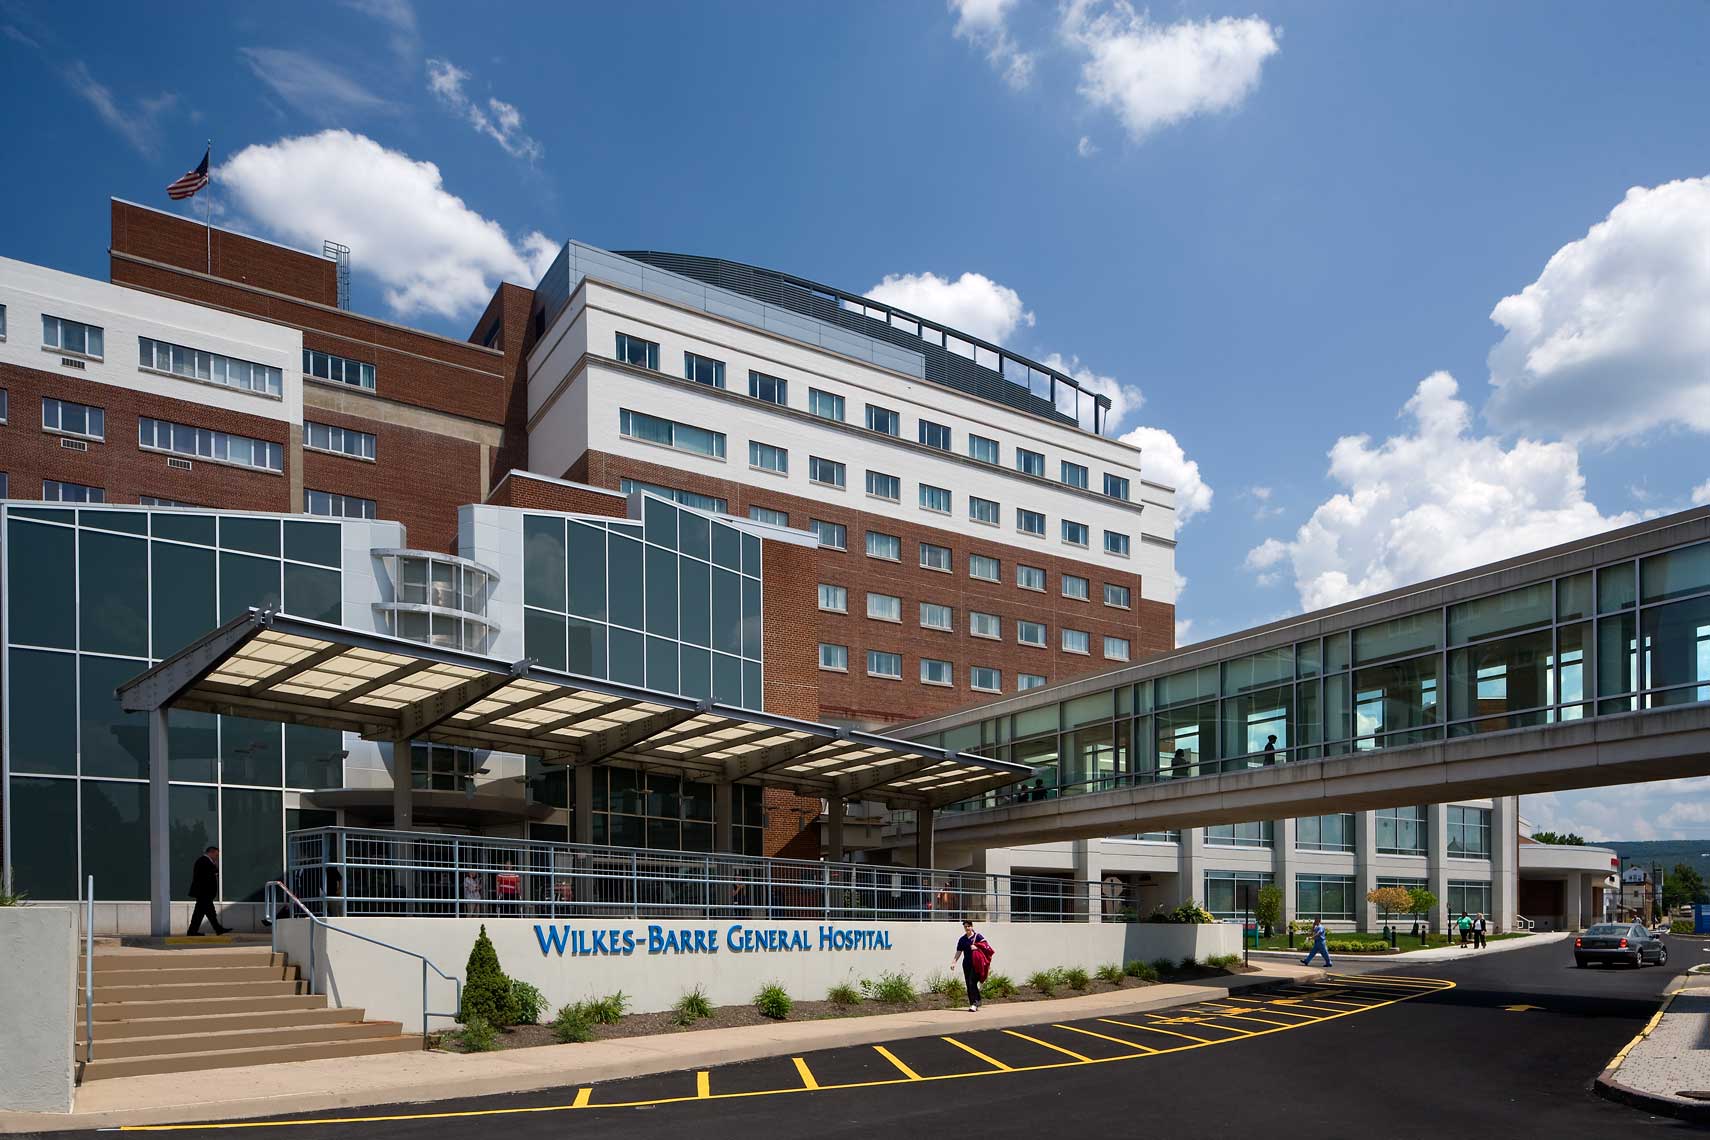 An interesting exterior photo of the architecture at Wilkes-Barre General Hospital